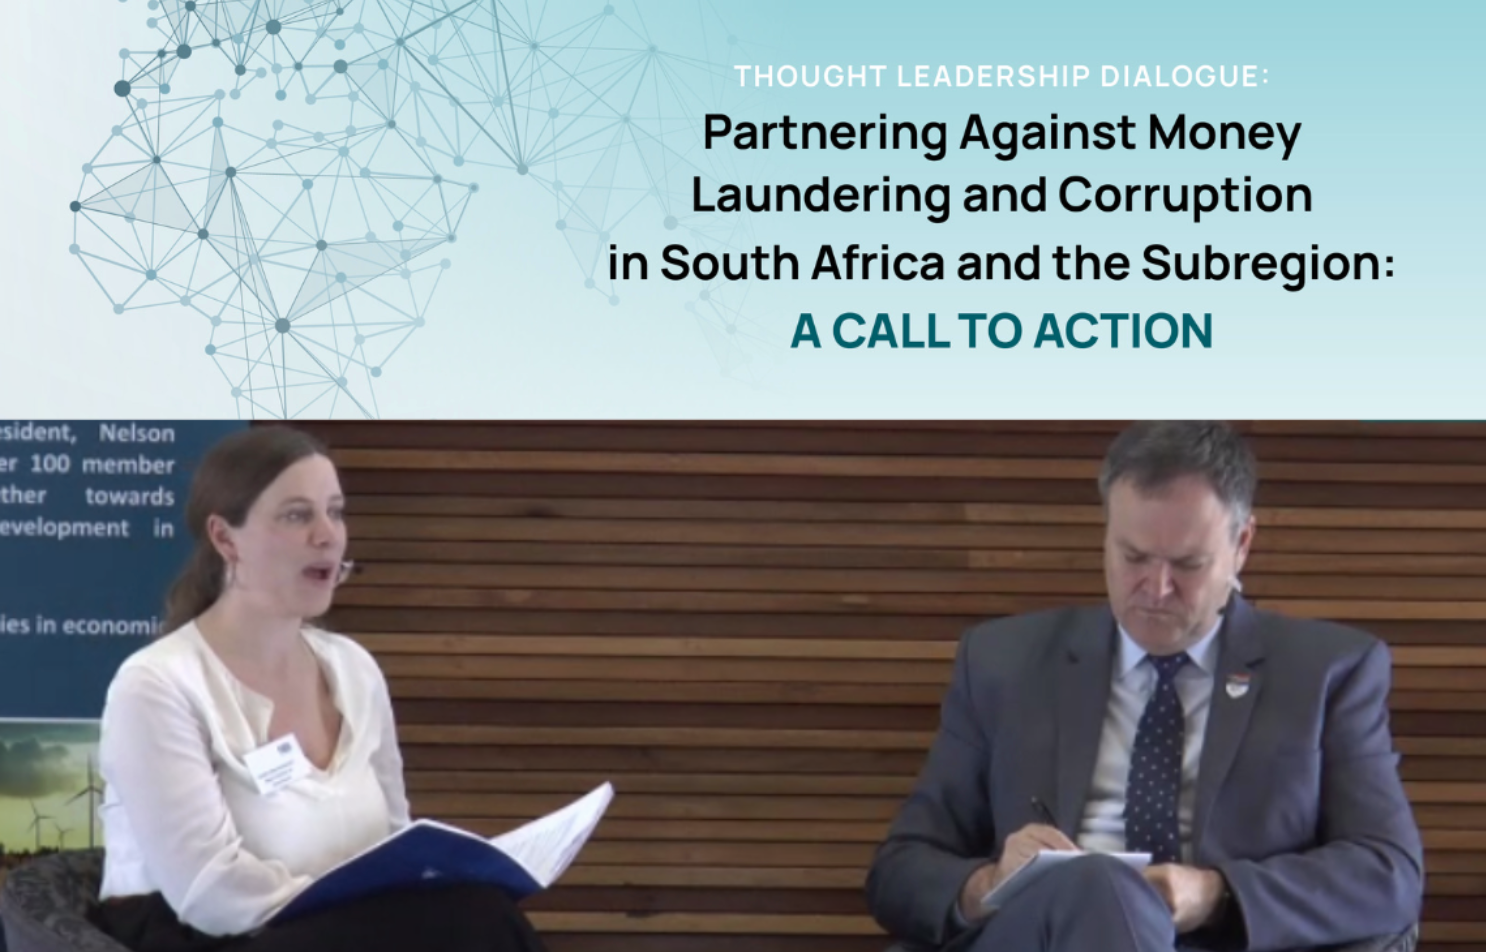 Partnering against money laundering and corruption